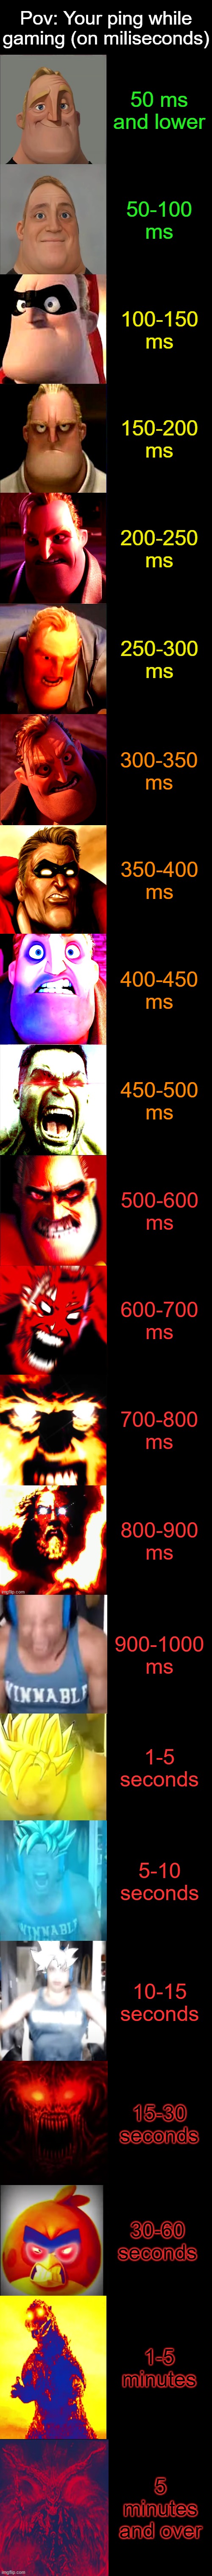 Mr. Incredible becoming angry POV: your ping while gaming | Pov: Your ping while gaming (on miliseconds); 50 ms and lower; 50-100 ms; 100-150 ms; 150-200 ms; 200-250 ms; 250-300 ms; 300-350 ms; 350-400 ms; 400-450 ms; 450-500 ms; 500-600 ms; 600-700 ms; 700-800 ms; 800-900 ms; 900-1000 ms; 1-5 seconds; 5-10 seconds; 10-15 seconds; 15-30 seconds; 30-60 seconds; 1-5 minutes; 5 minutes and over | image tagged in mr incredible becoming angry 21 phases | made w/ Imgflip meme maker